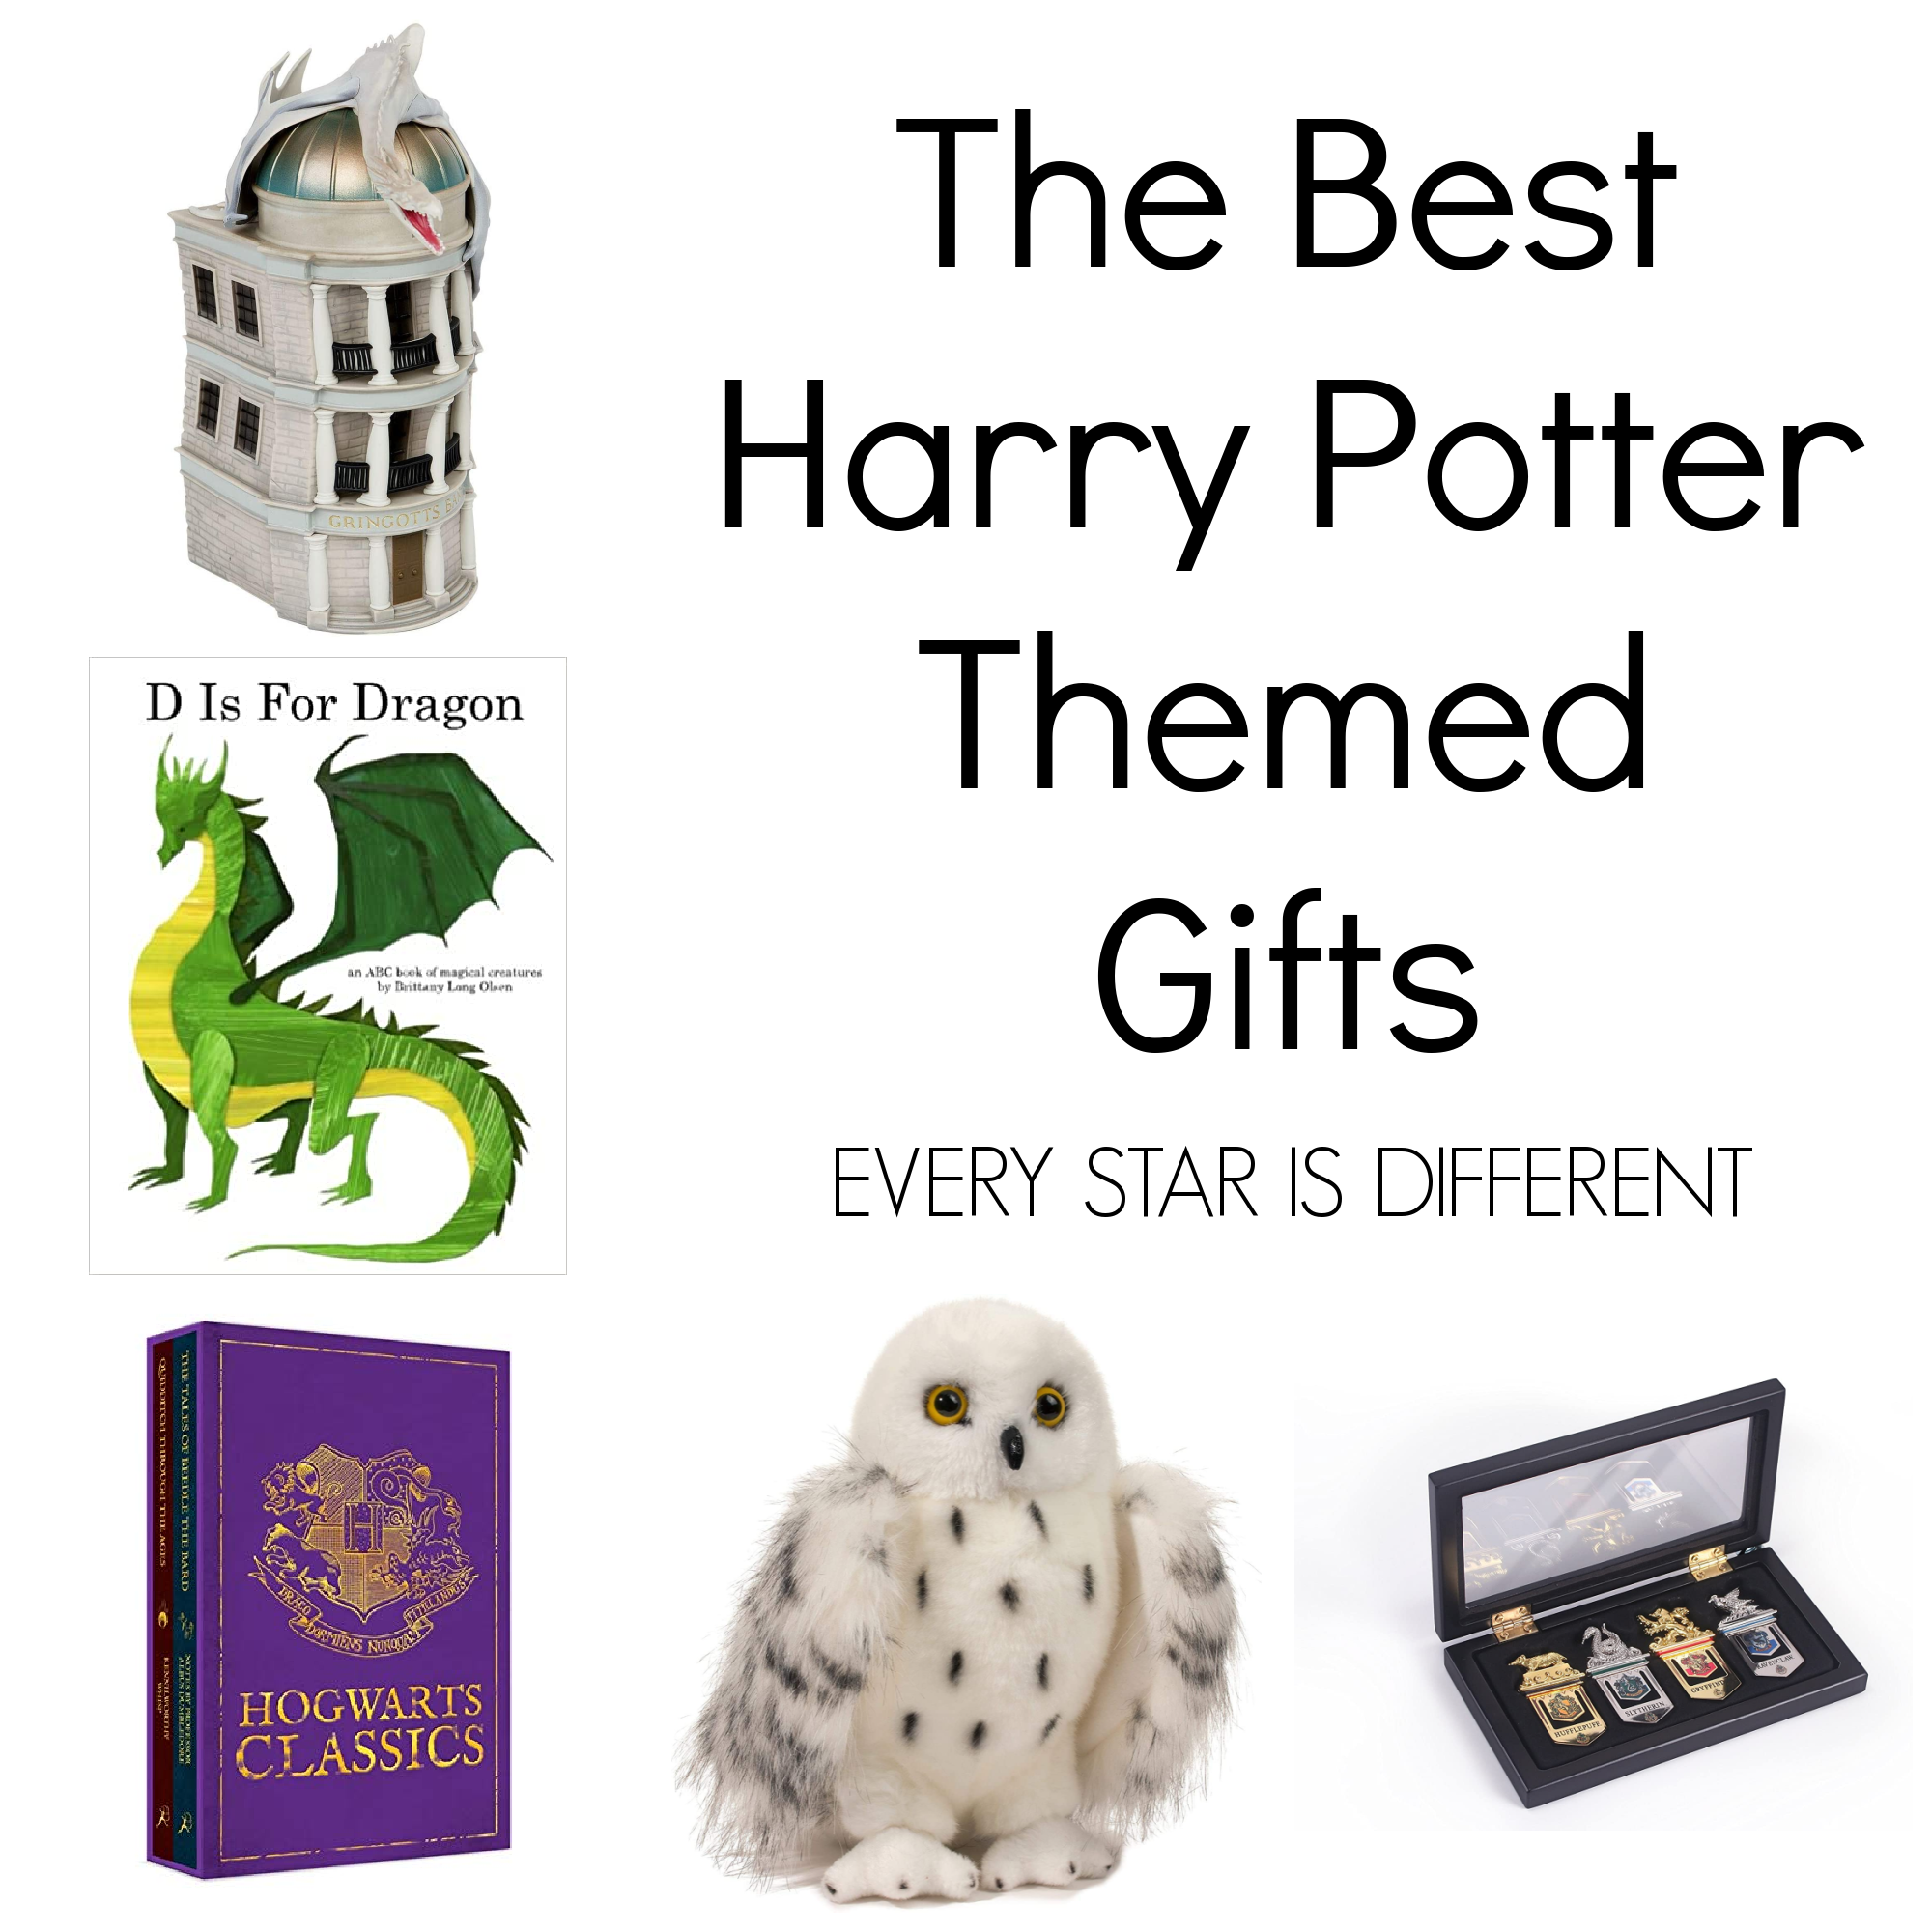 The Best Harry Potter Themed Gifts - Every Star Is Different